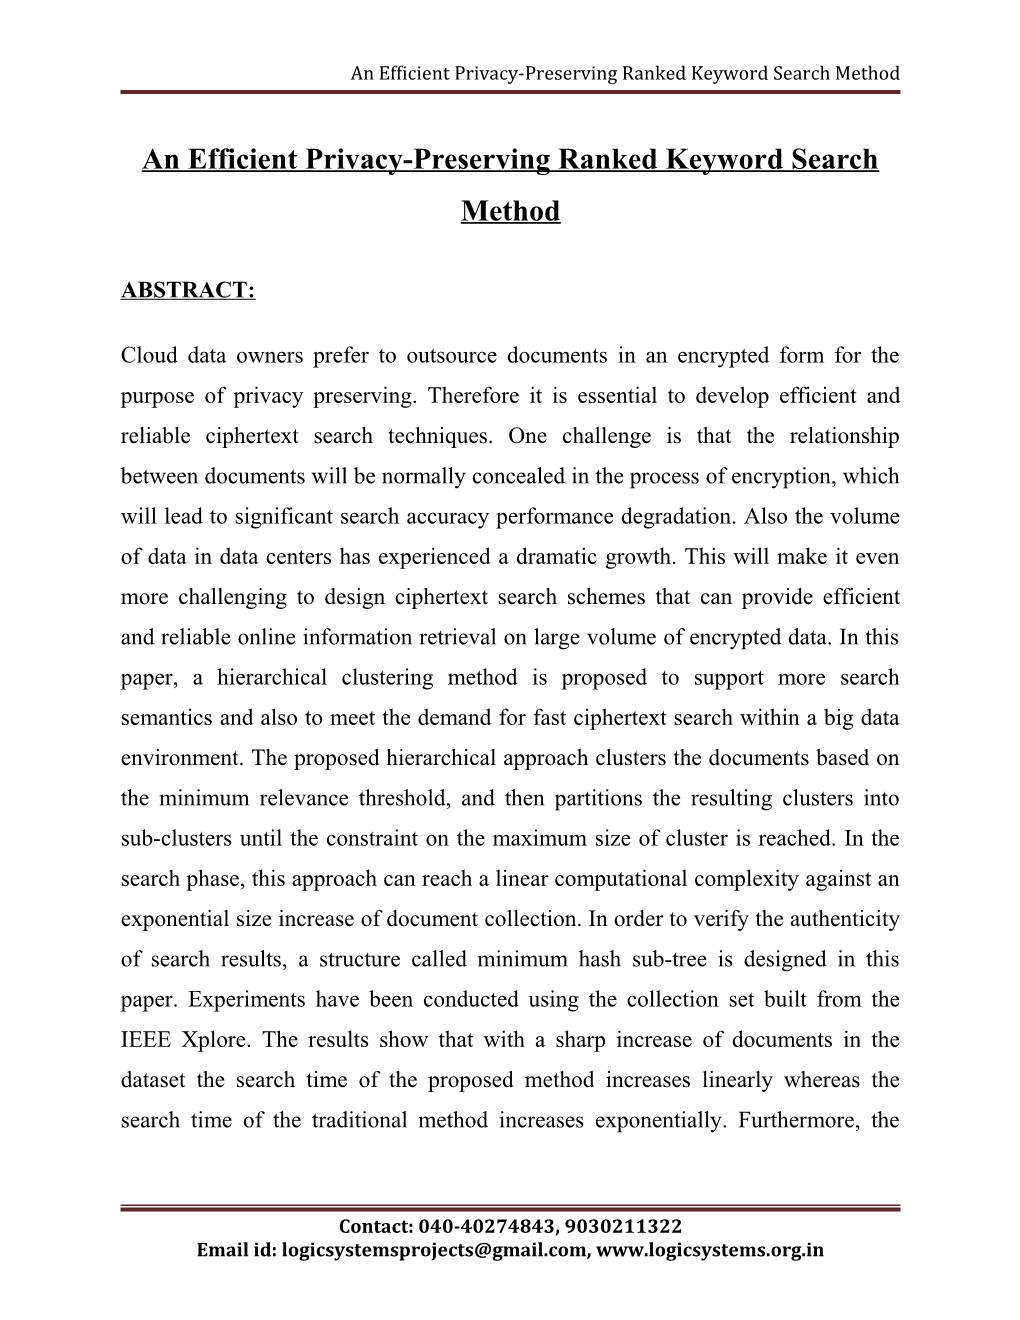 An Efficient Privacy-Preserving Ranked Keyword Search Method